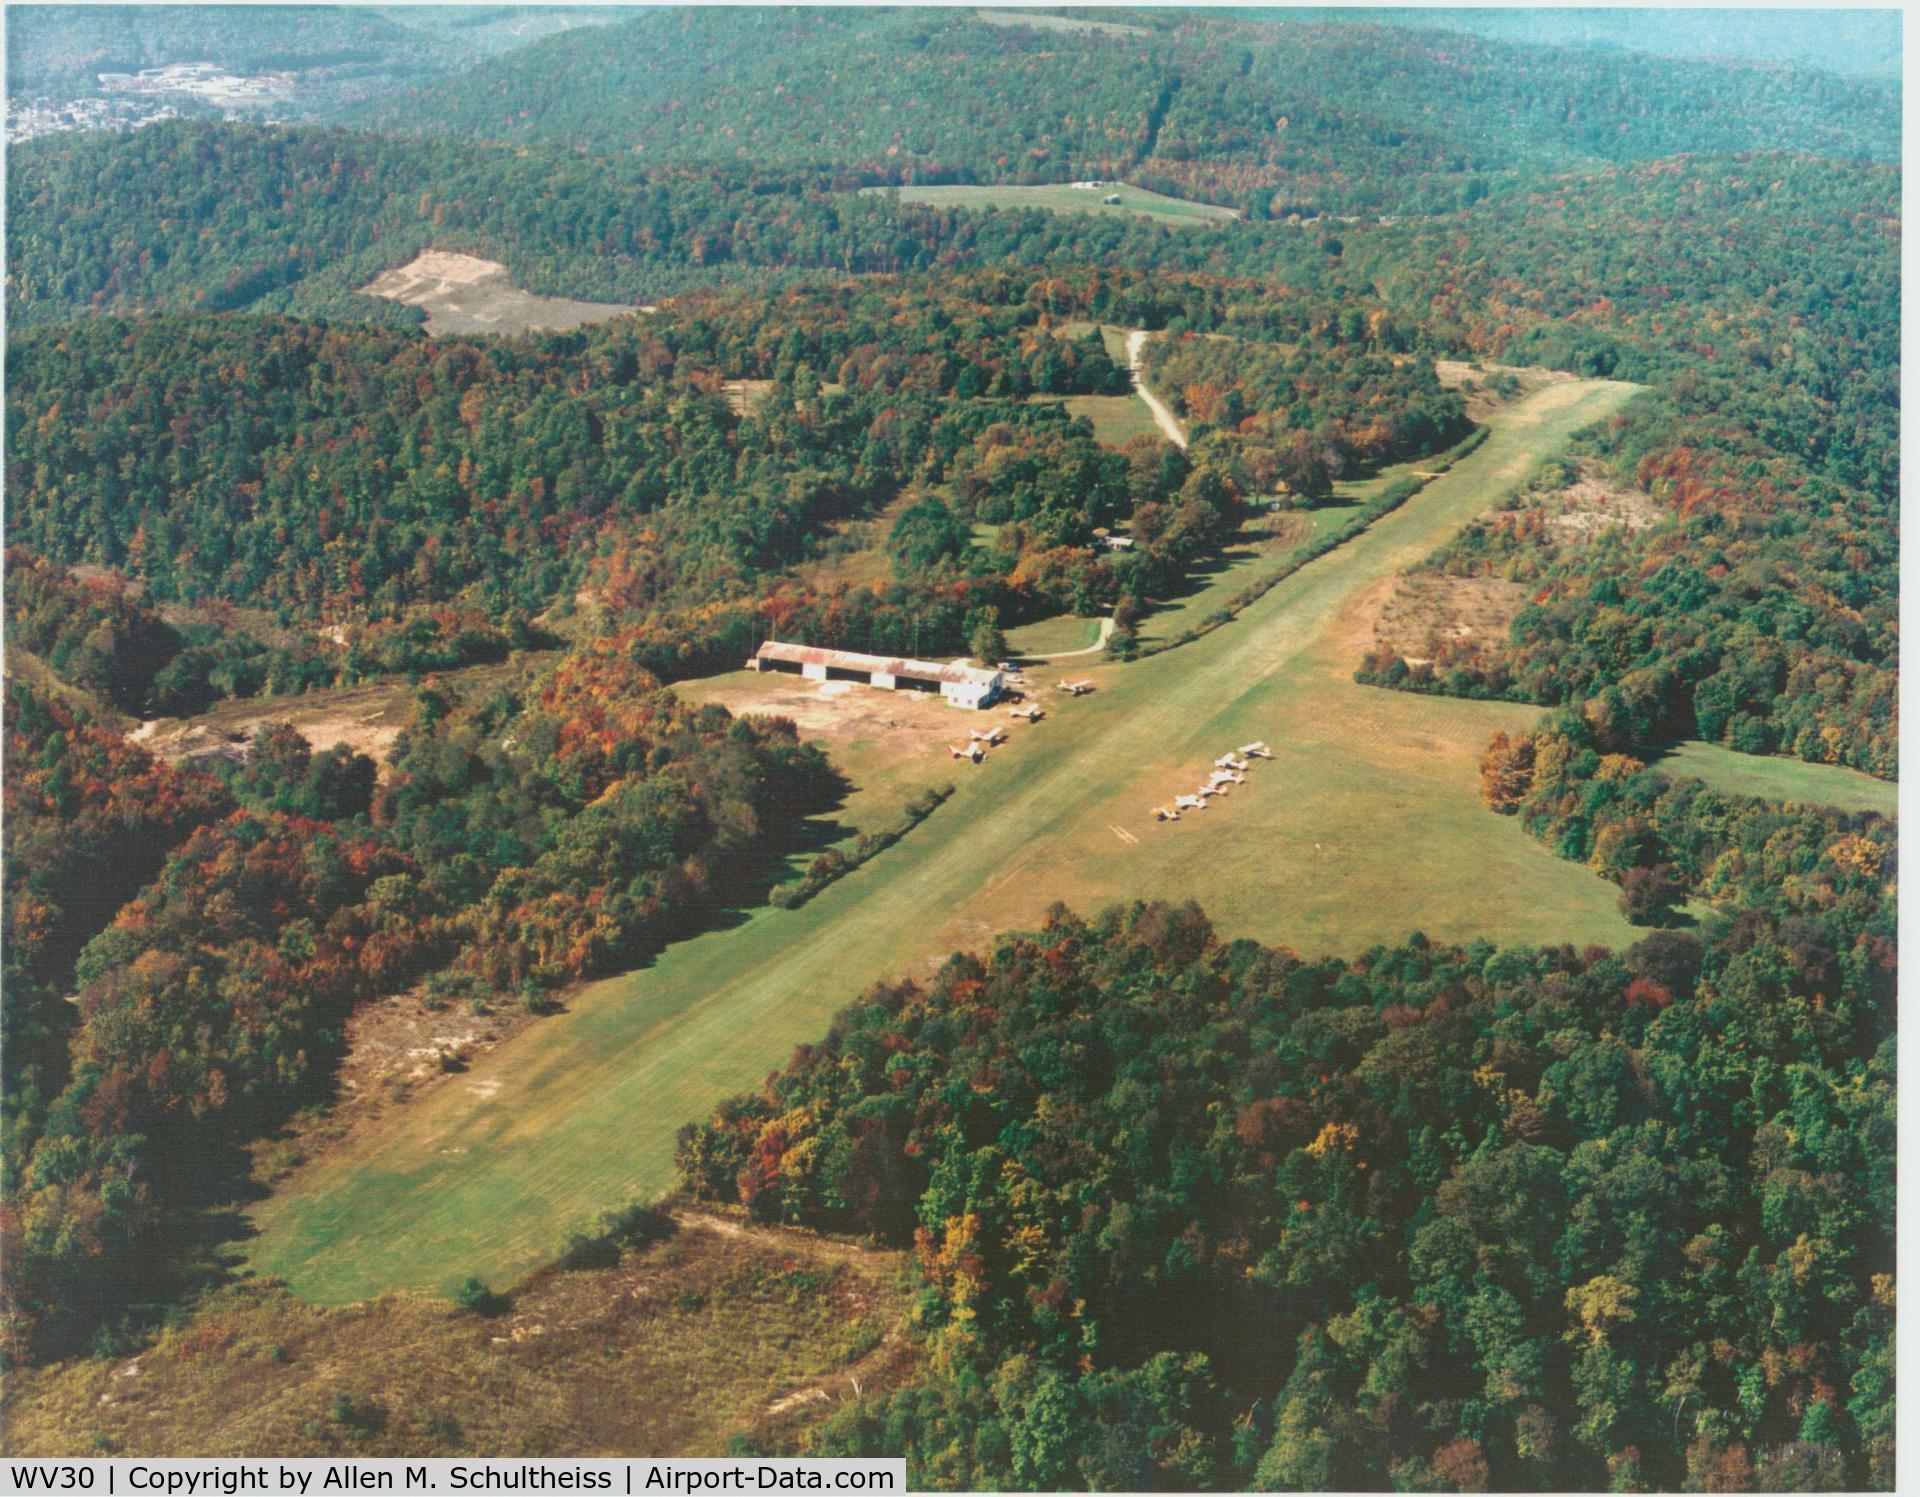 Rainelle Airport (WV30) - Photo purchased from Squire Haines in 2002